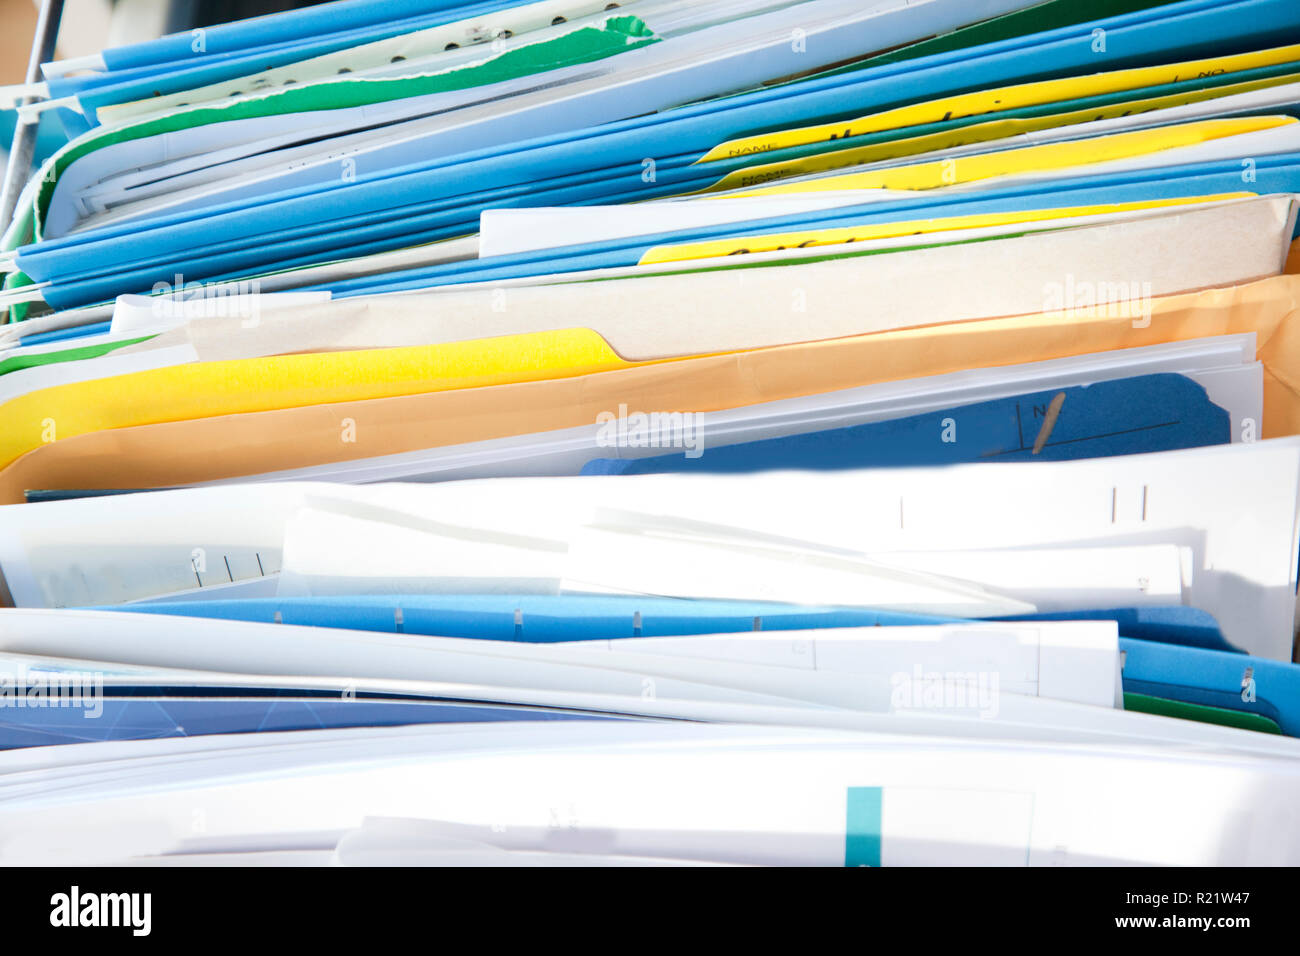 A messy drawer or cabinet with filed papers and documents sorted in folders Stock Photo